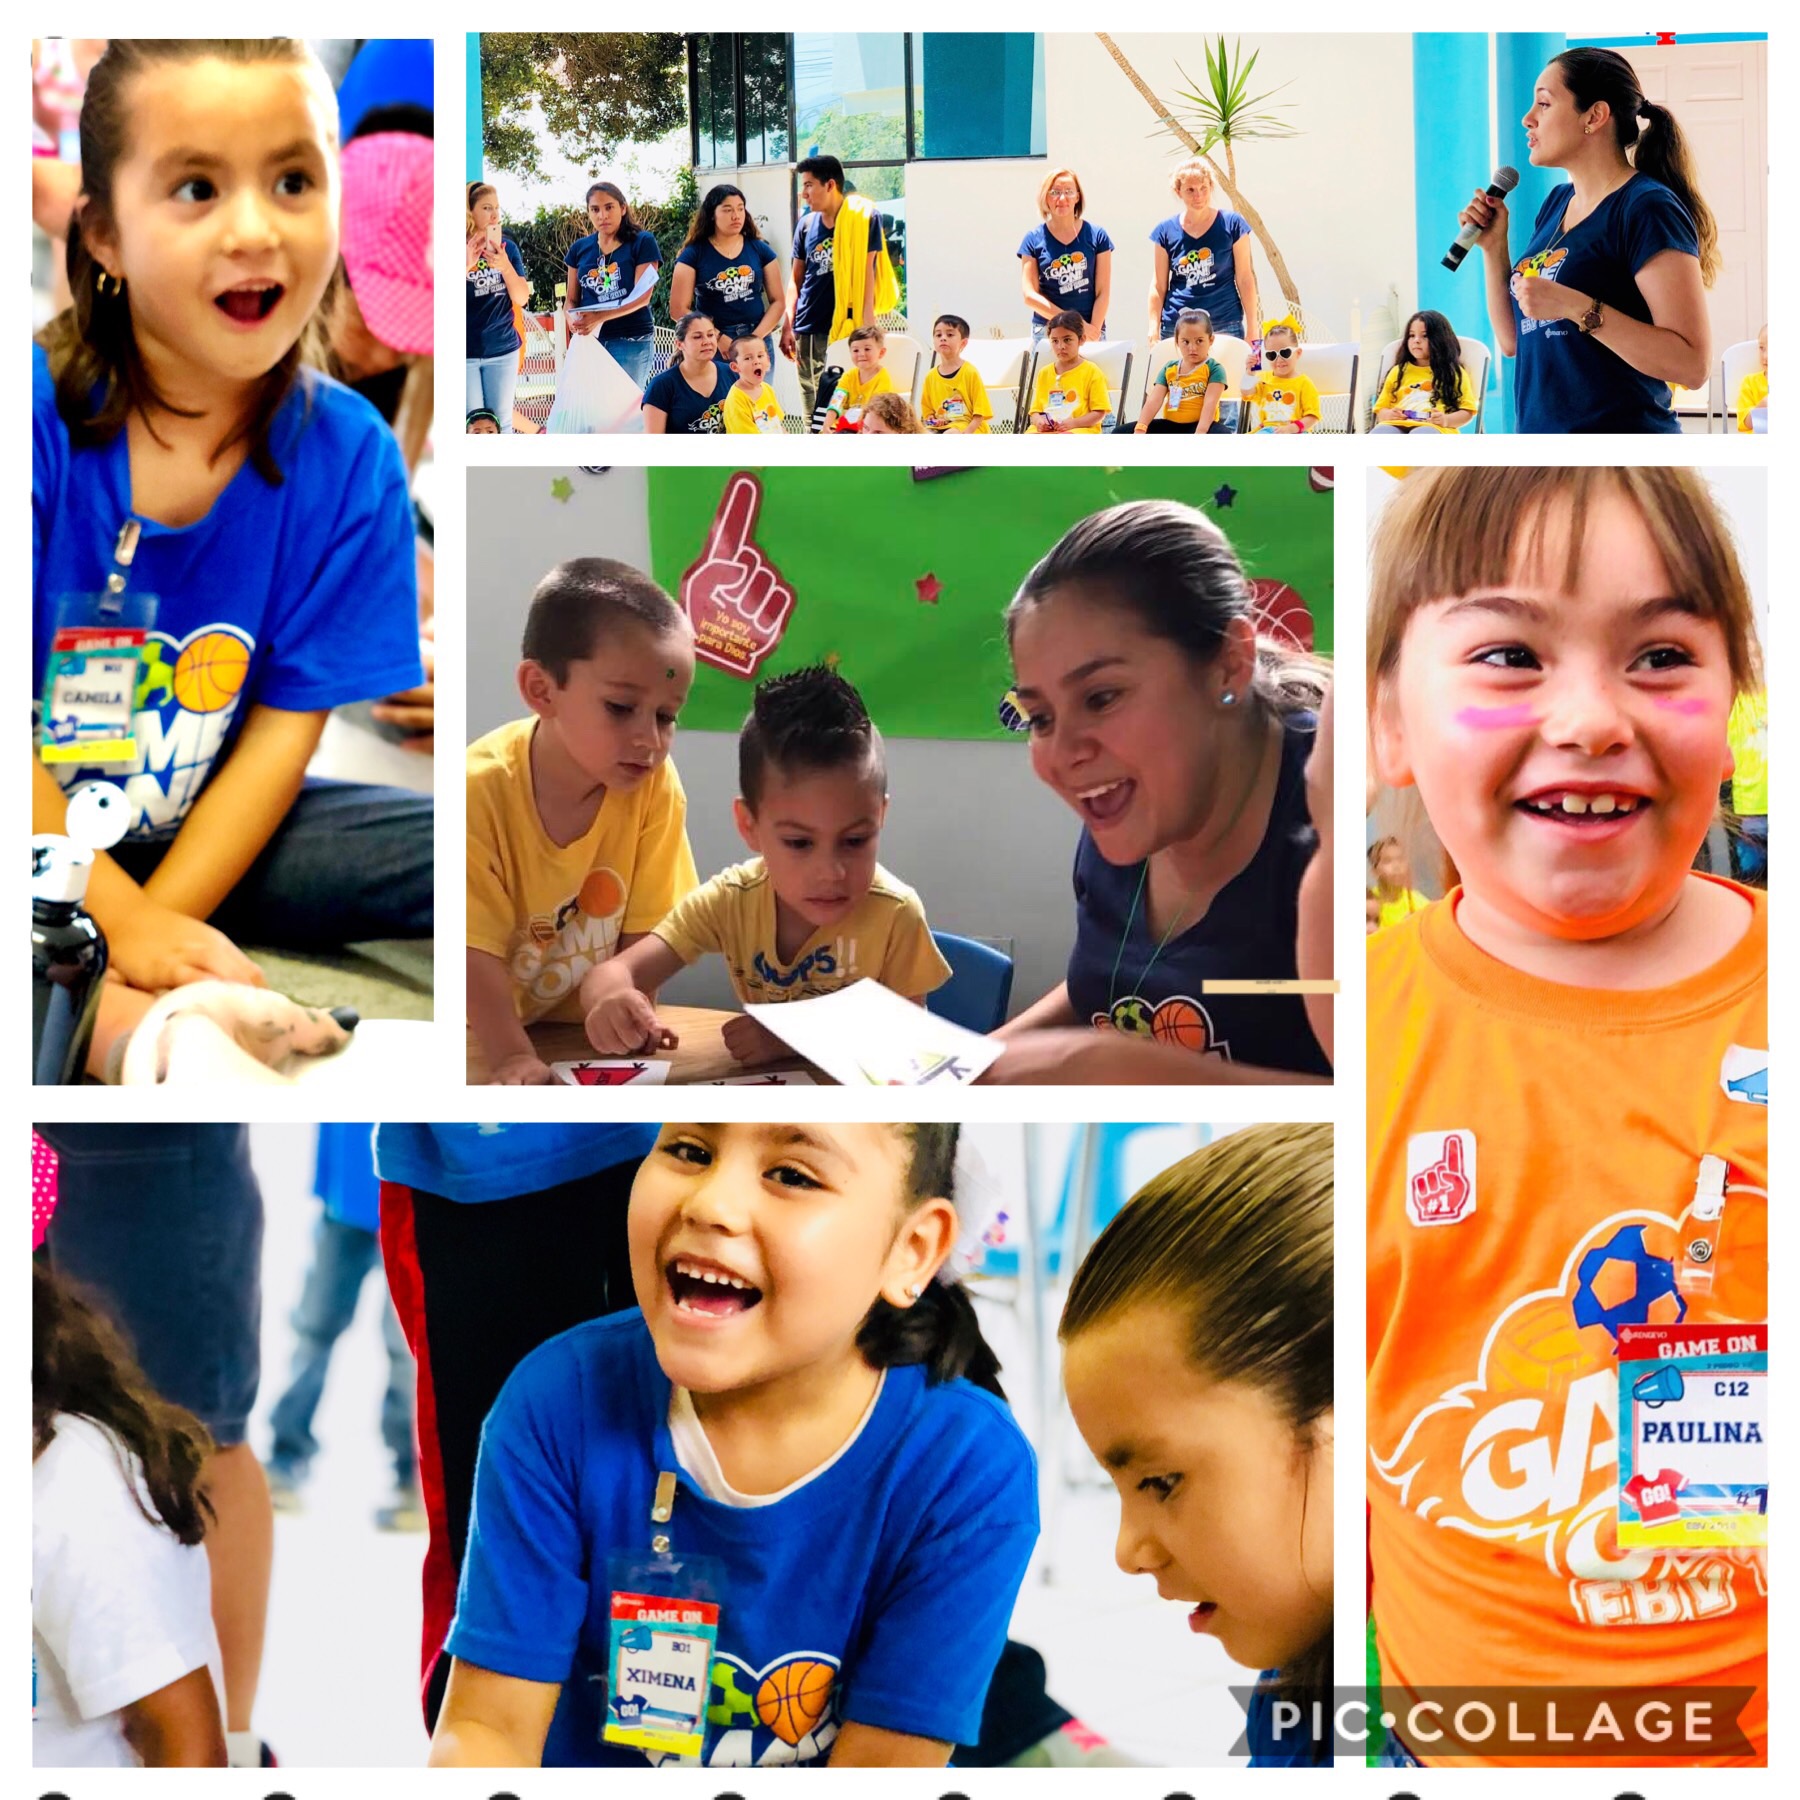 Many smiles - a fun filled week on VBS in Ensenada 